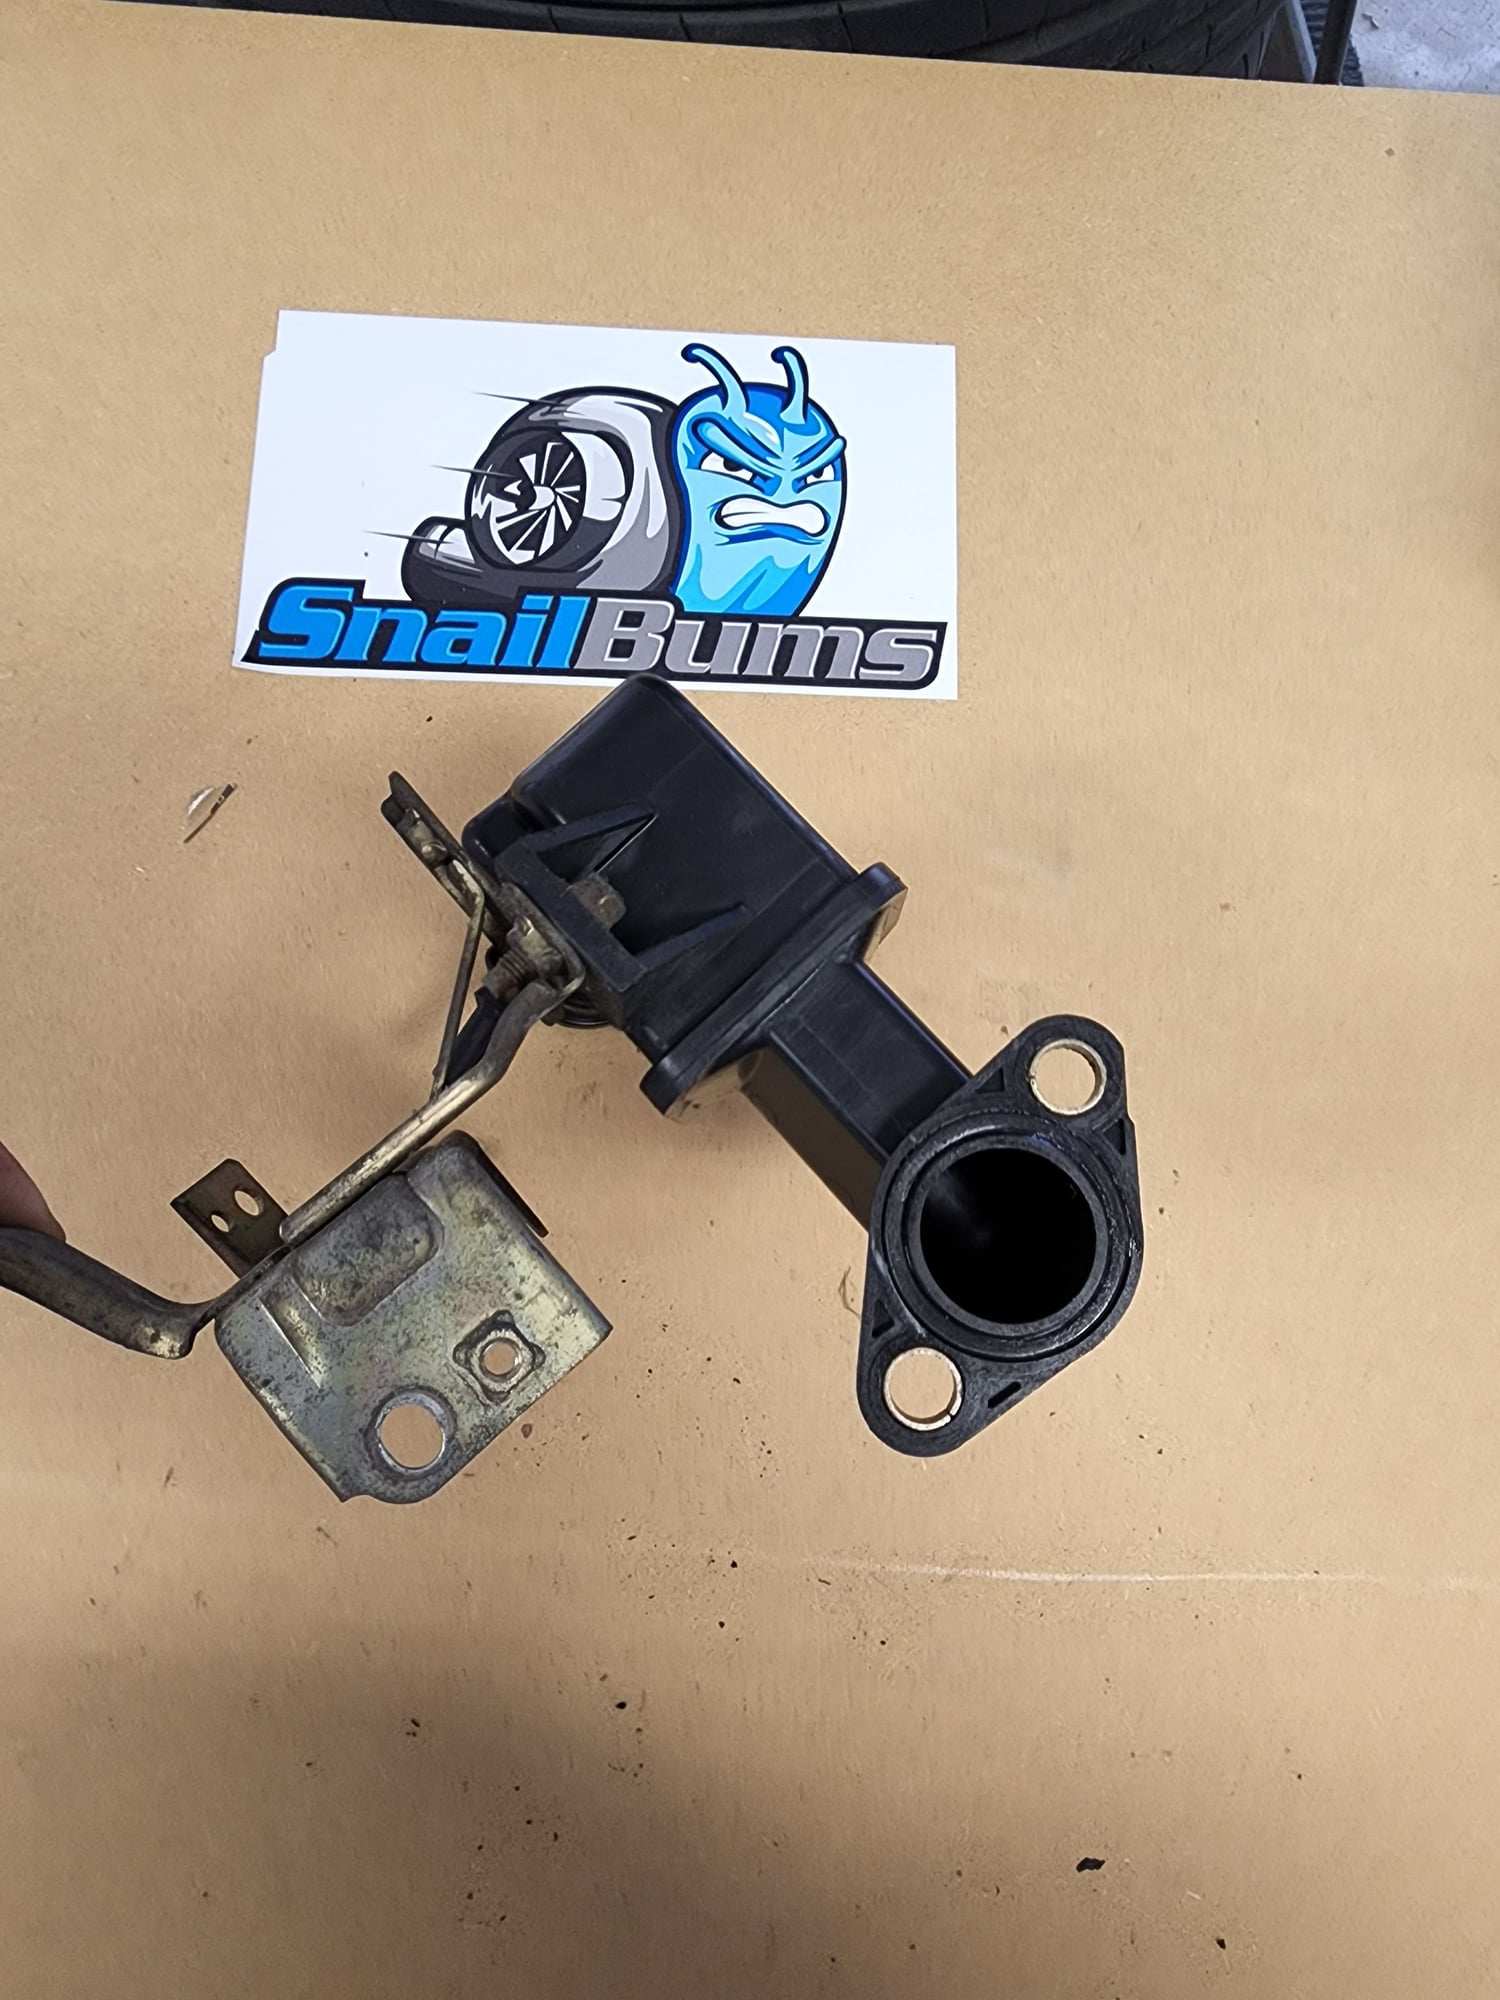 Accessories - twin turbos, twin Power, and random parts for sale. - Used - 1993 to 1995 Mazda RX-7 - Homer Glen, IL 60491, United States